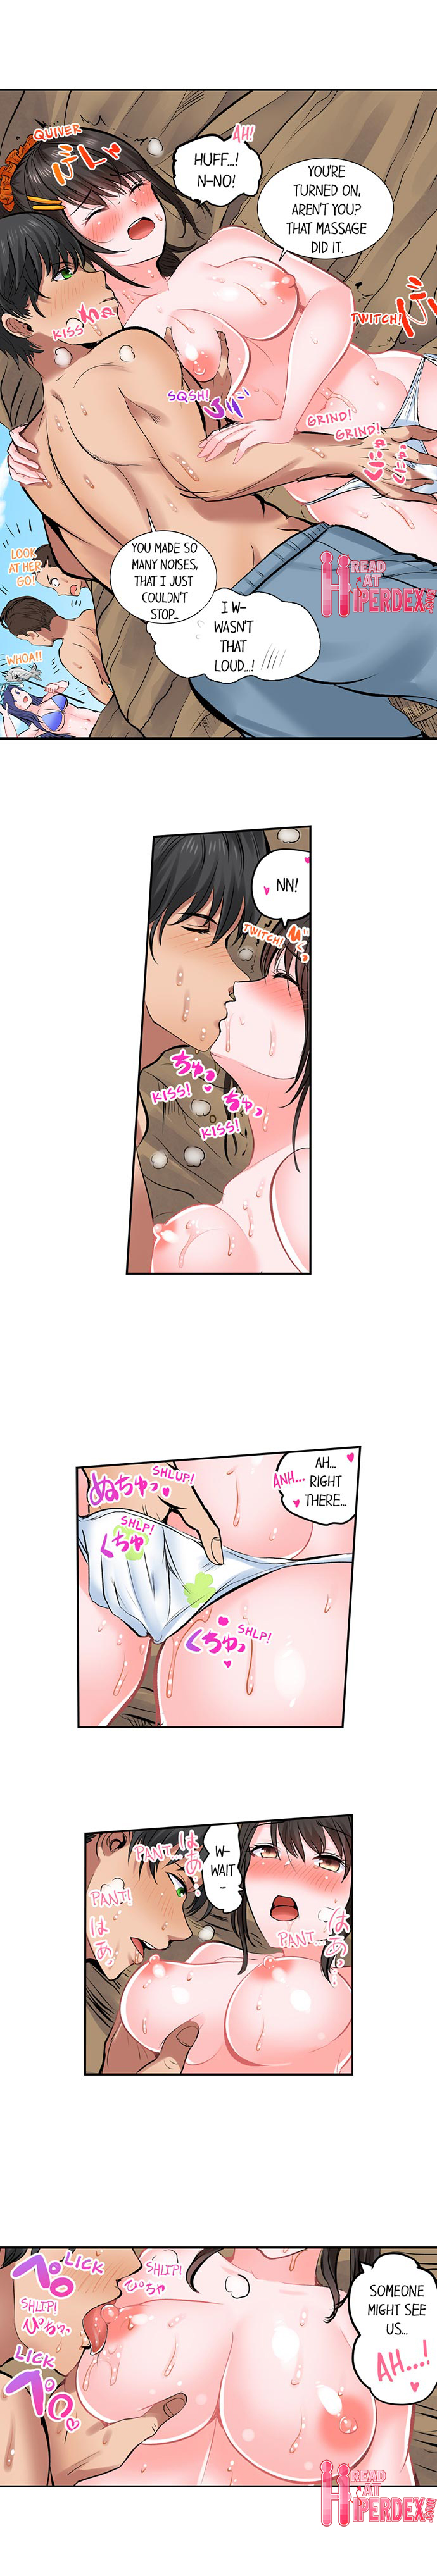 Dick Me Up Inside - Chapter 17 Page 8